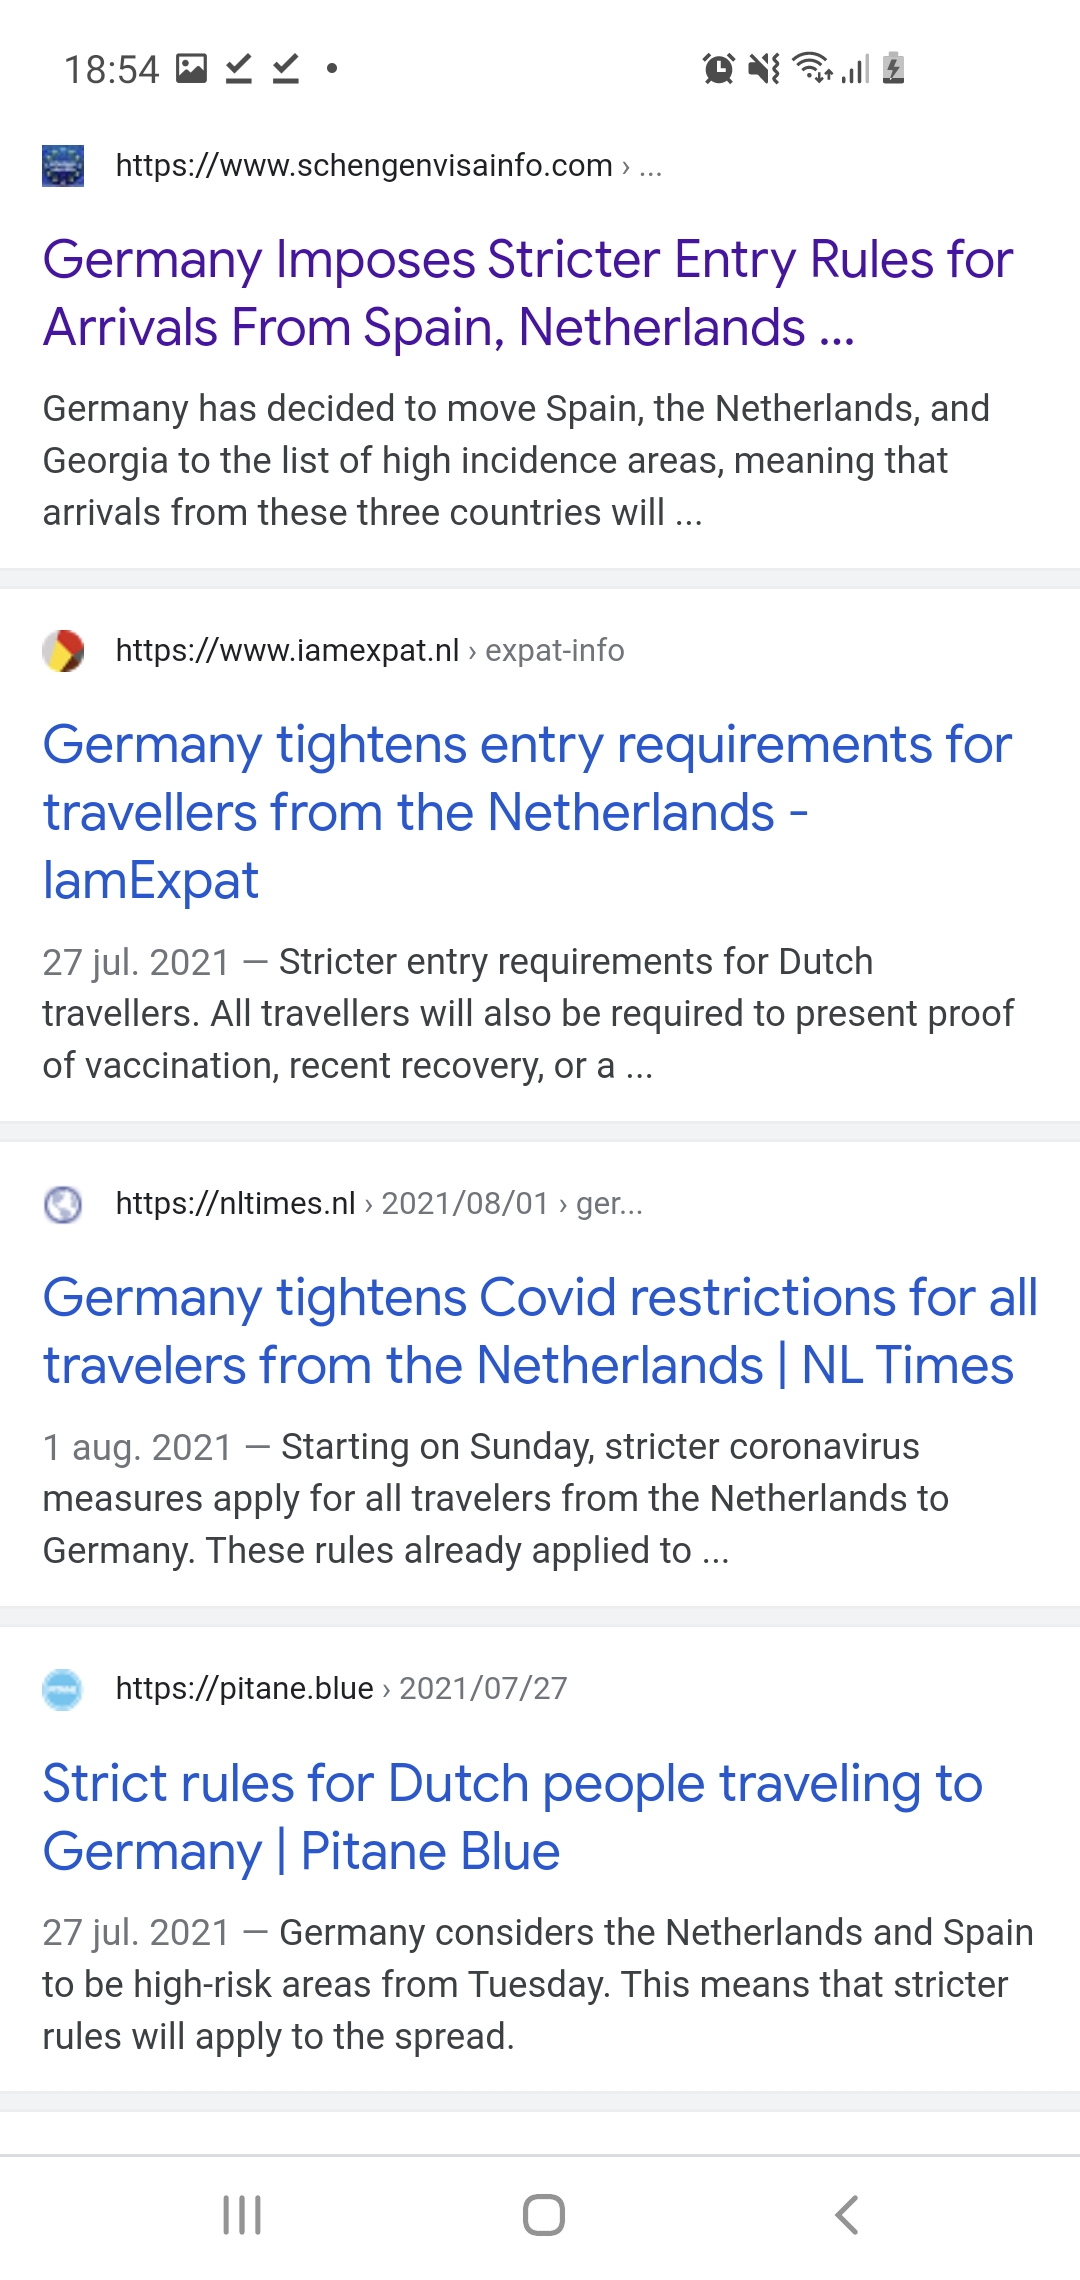 Stricter restriction for travelling from The Netherlands to Germany